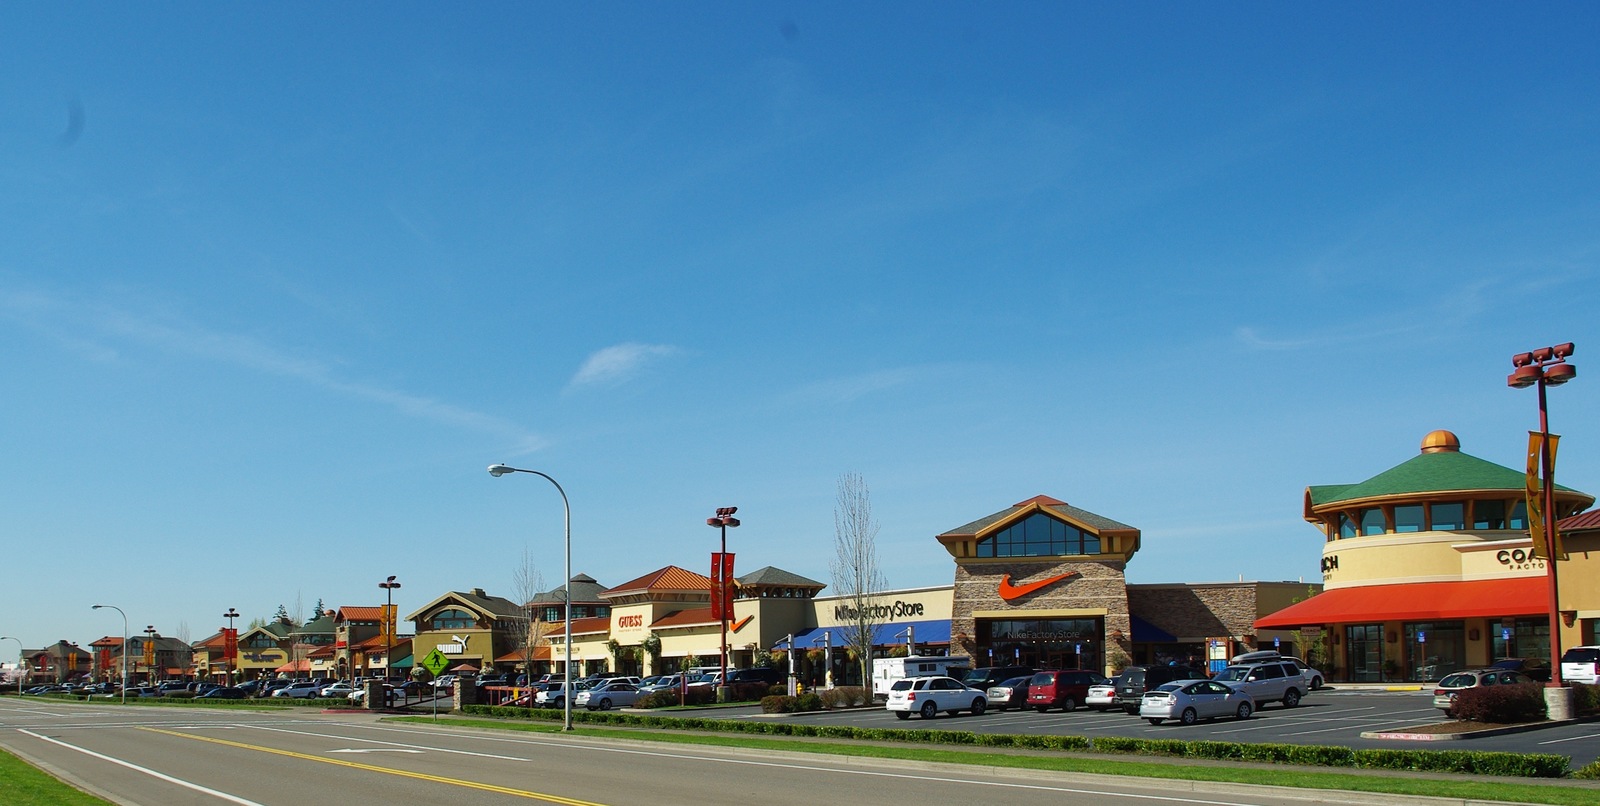 Woodburn Premium Outlets